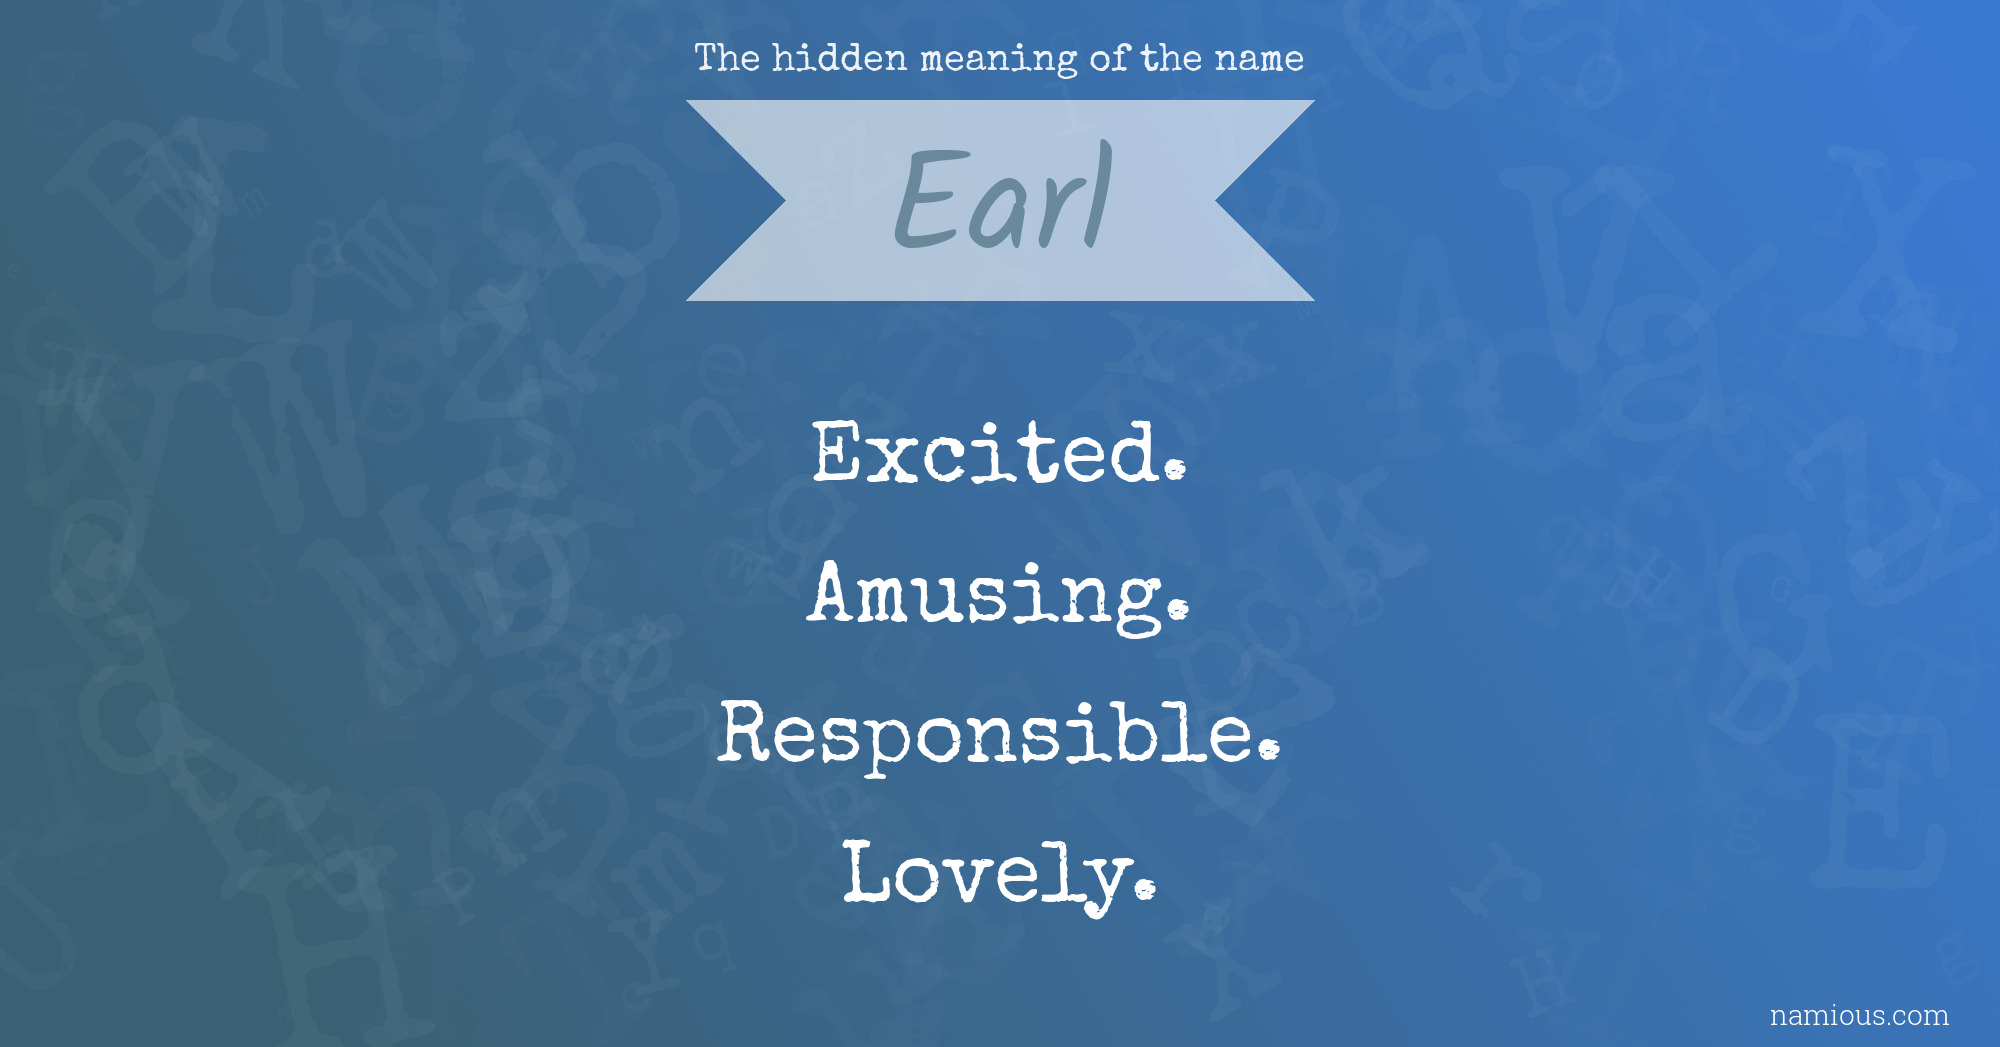 The hidden meaning of the name Earl